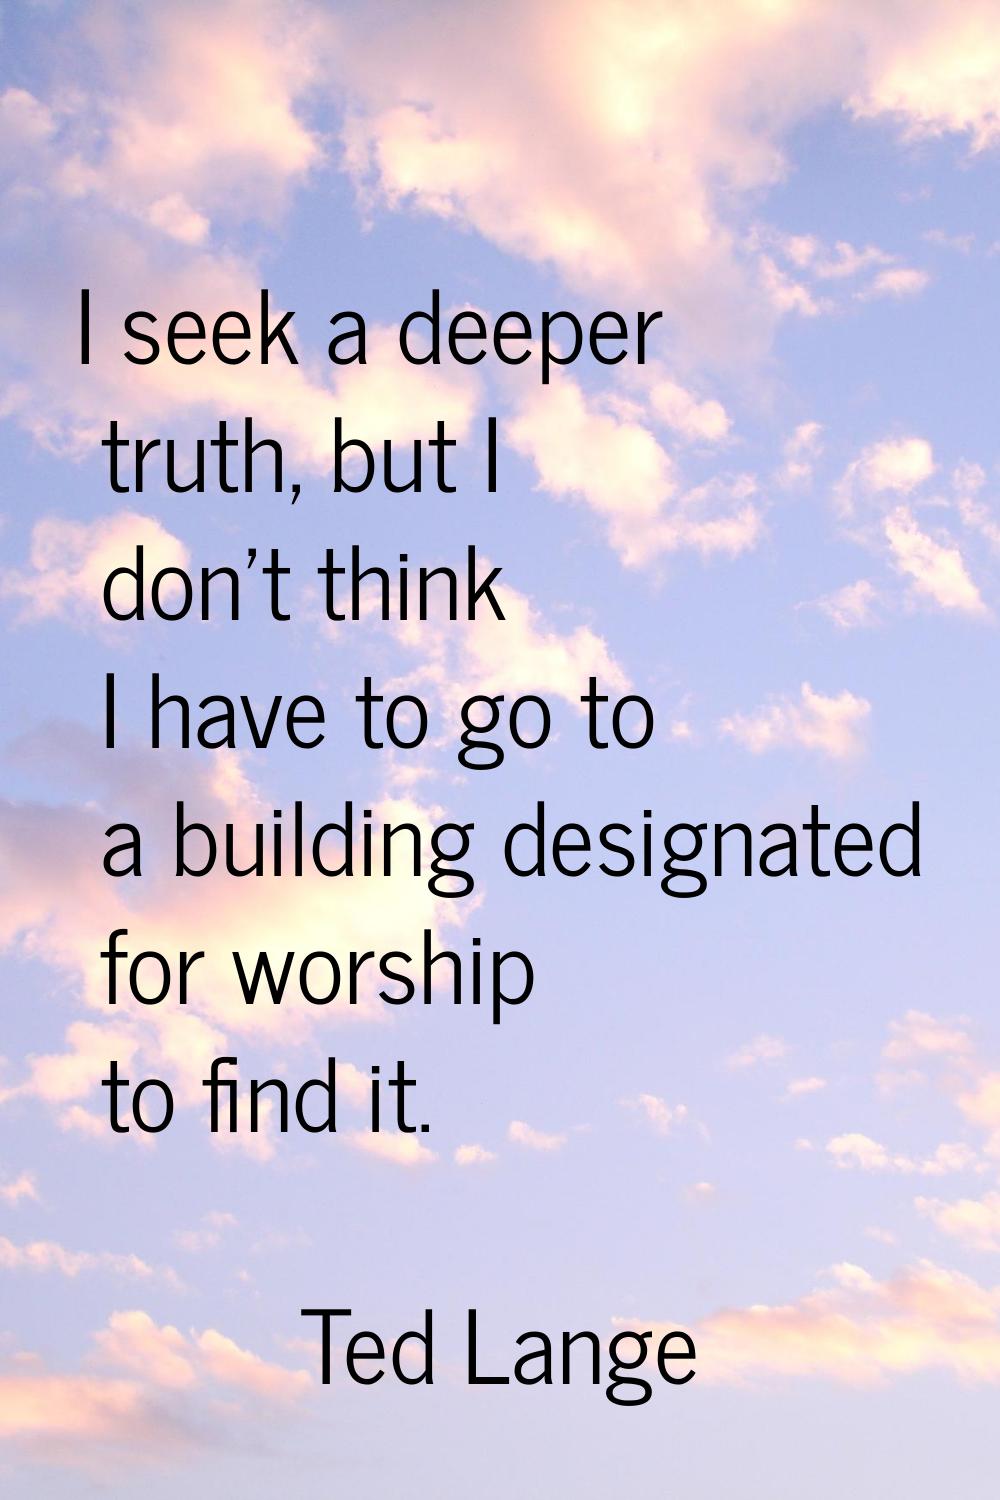 I seek a deeper truth, but I don't think I have to go to a building designated for worship to find 